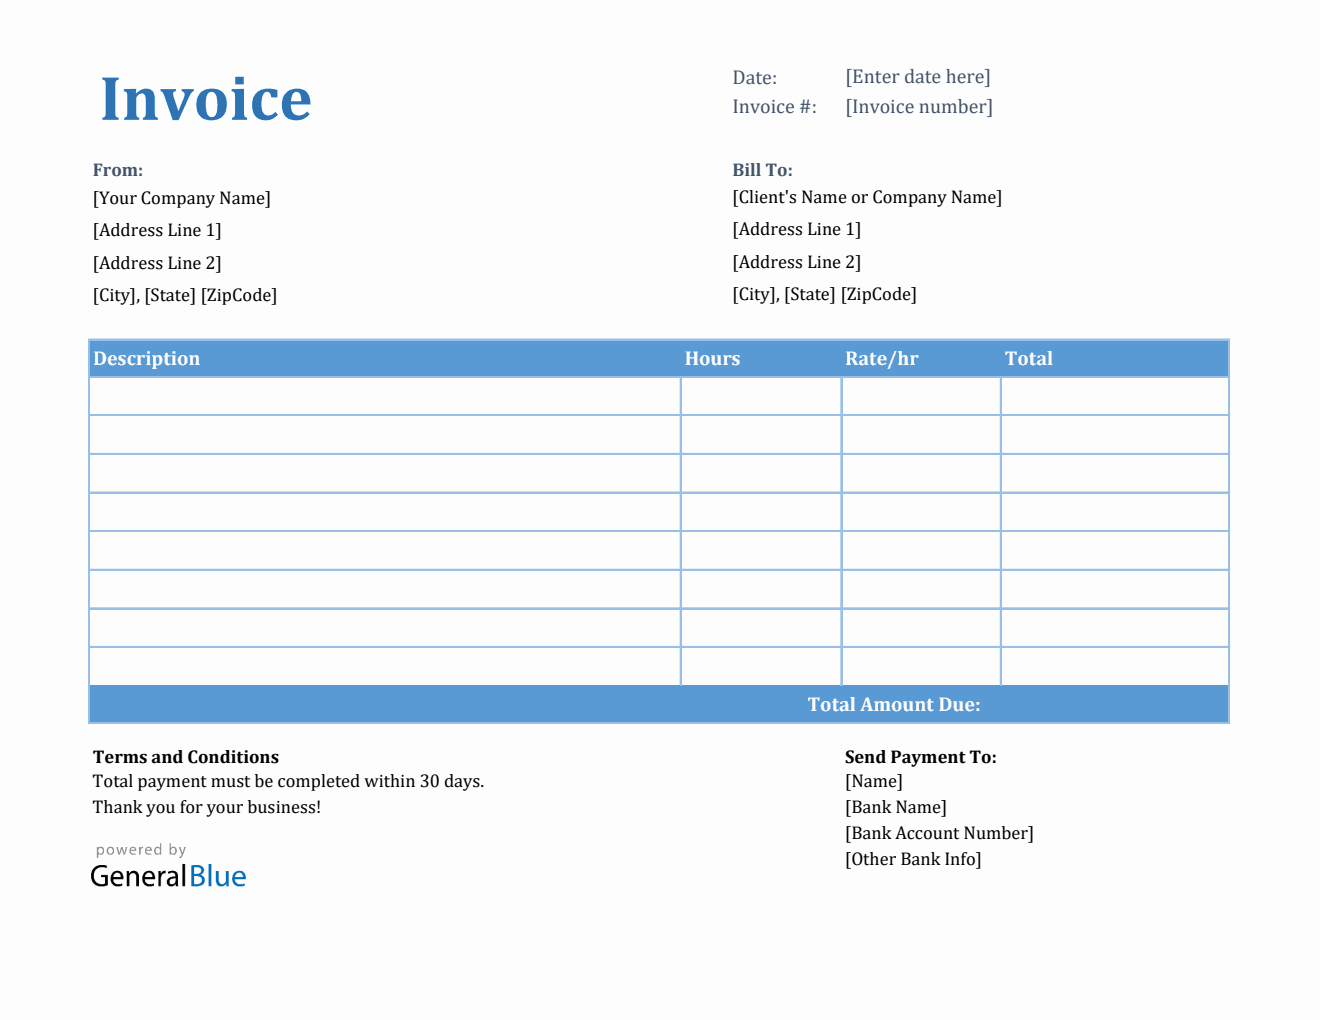 Invoice Template for U.S. Freelancers in Excel (Printable)